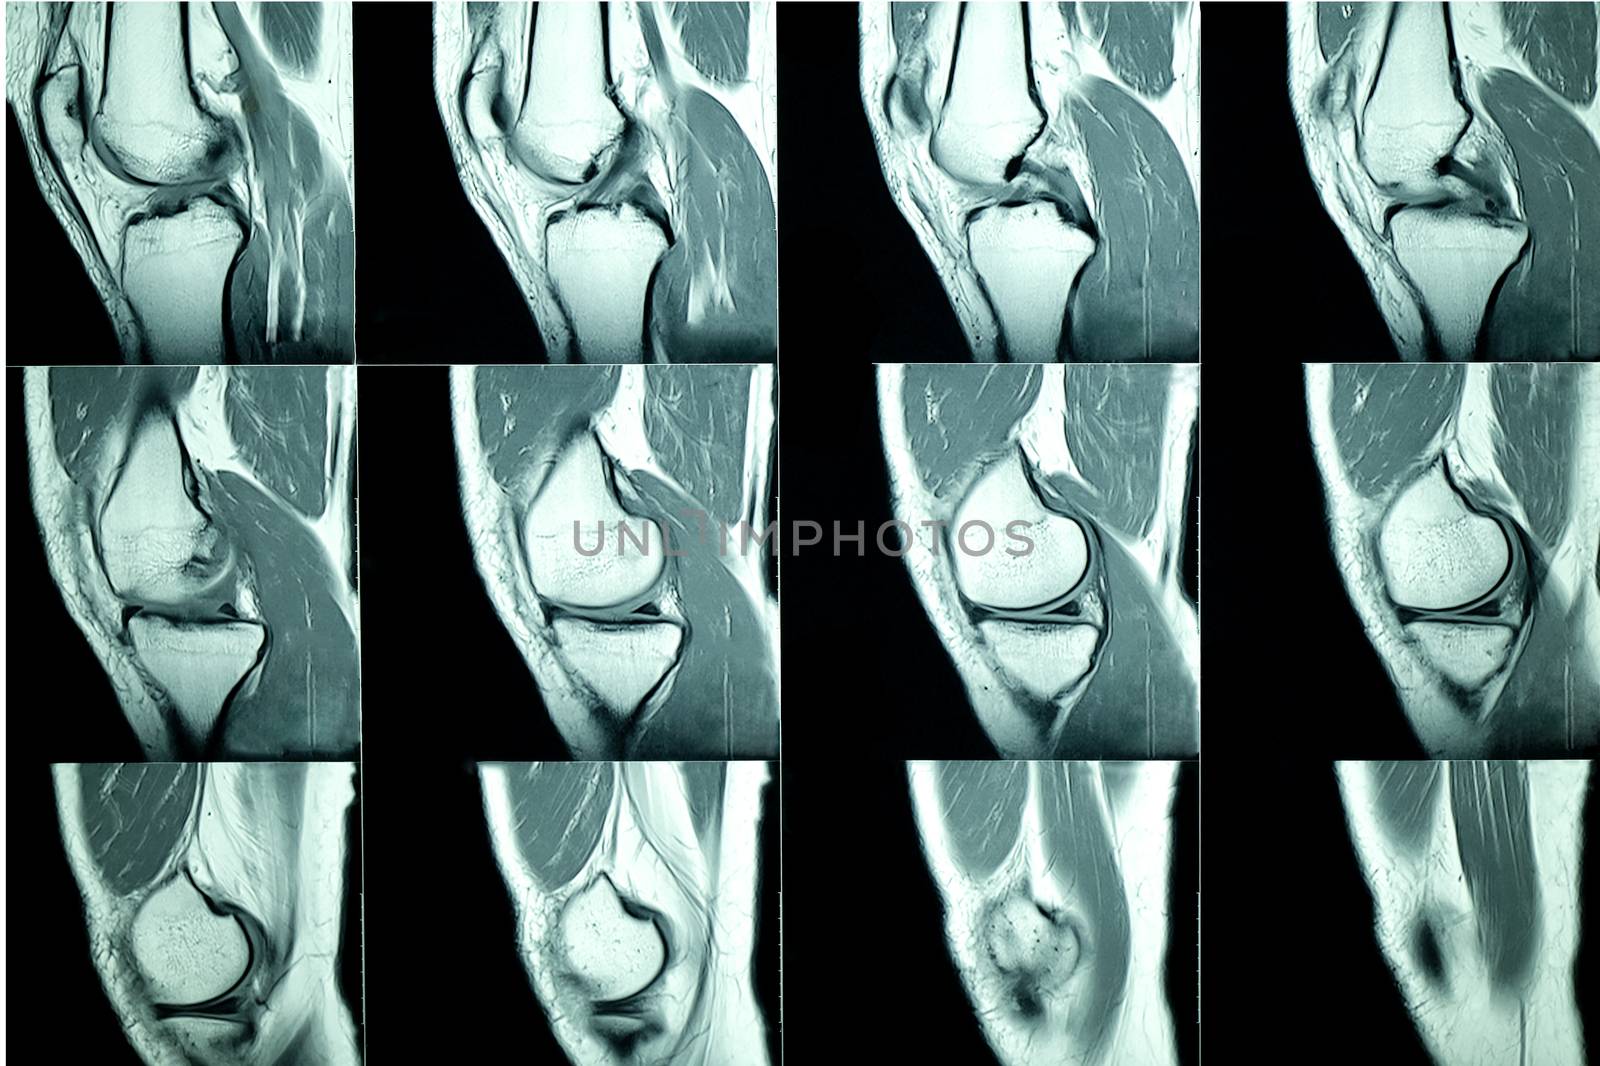 MRI scan of a male patient with a history of chronic knee pain